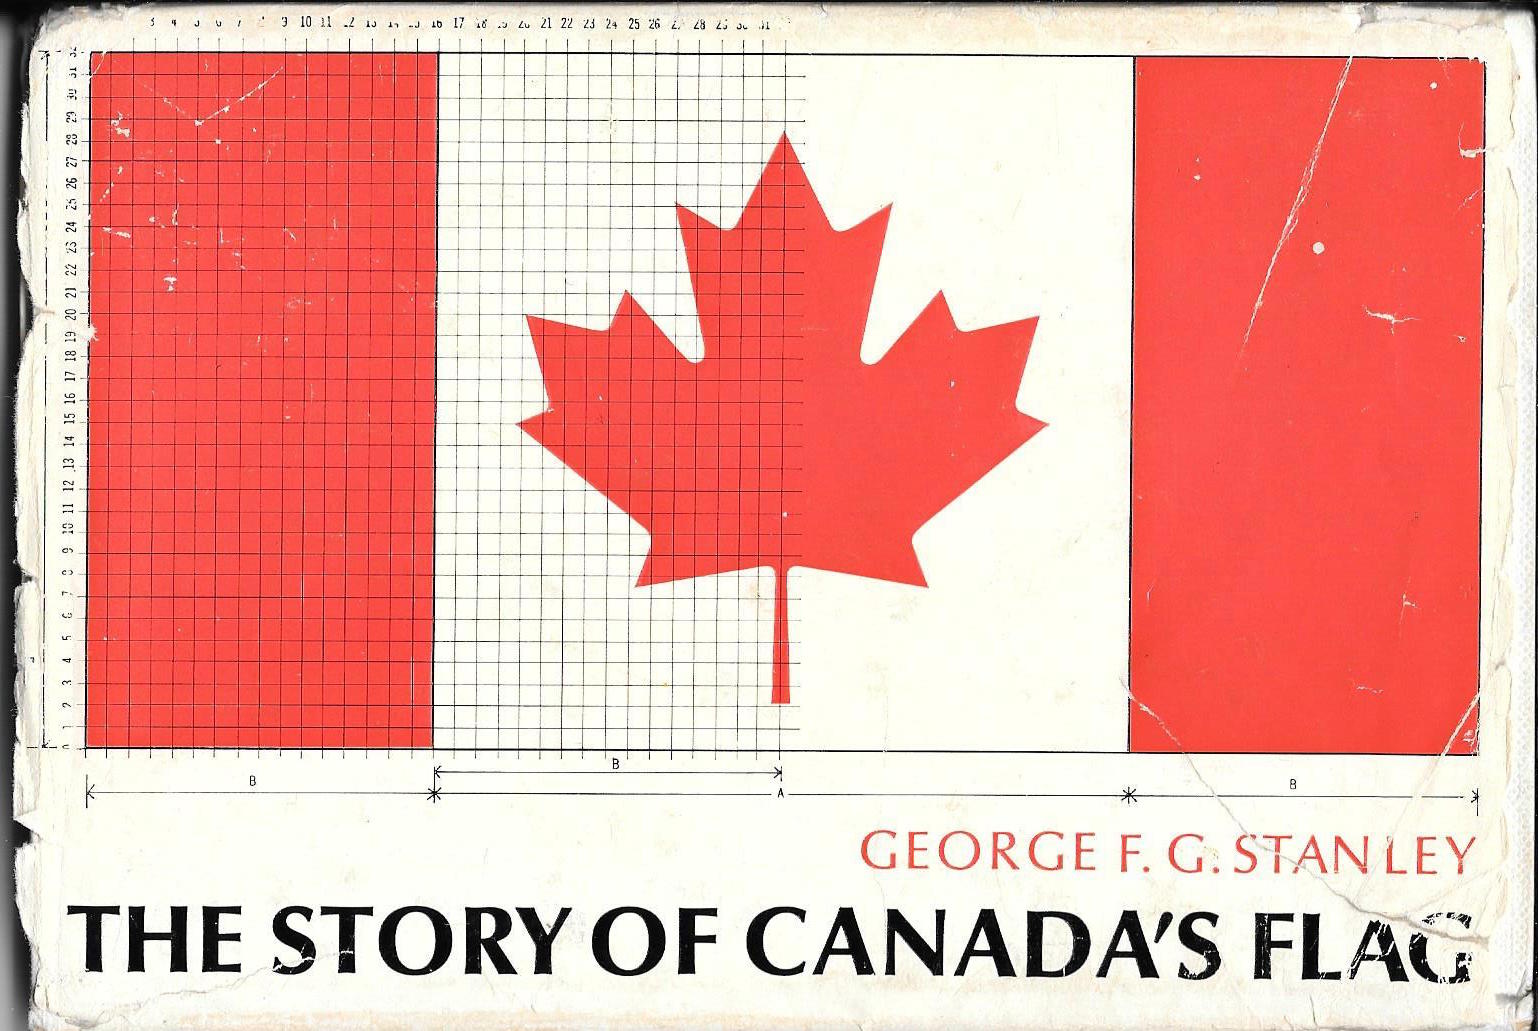 Unifying a Nation It stirs our hearts today, but the Canadian flag was once the source of great debate across the nation. The events that determined the...